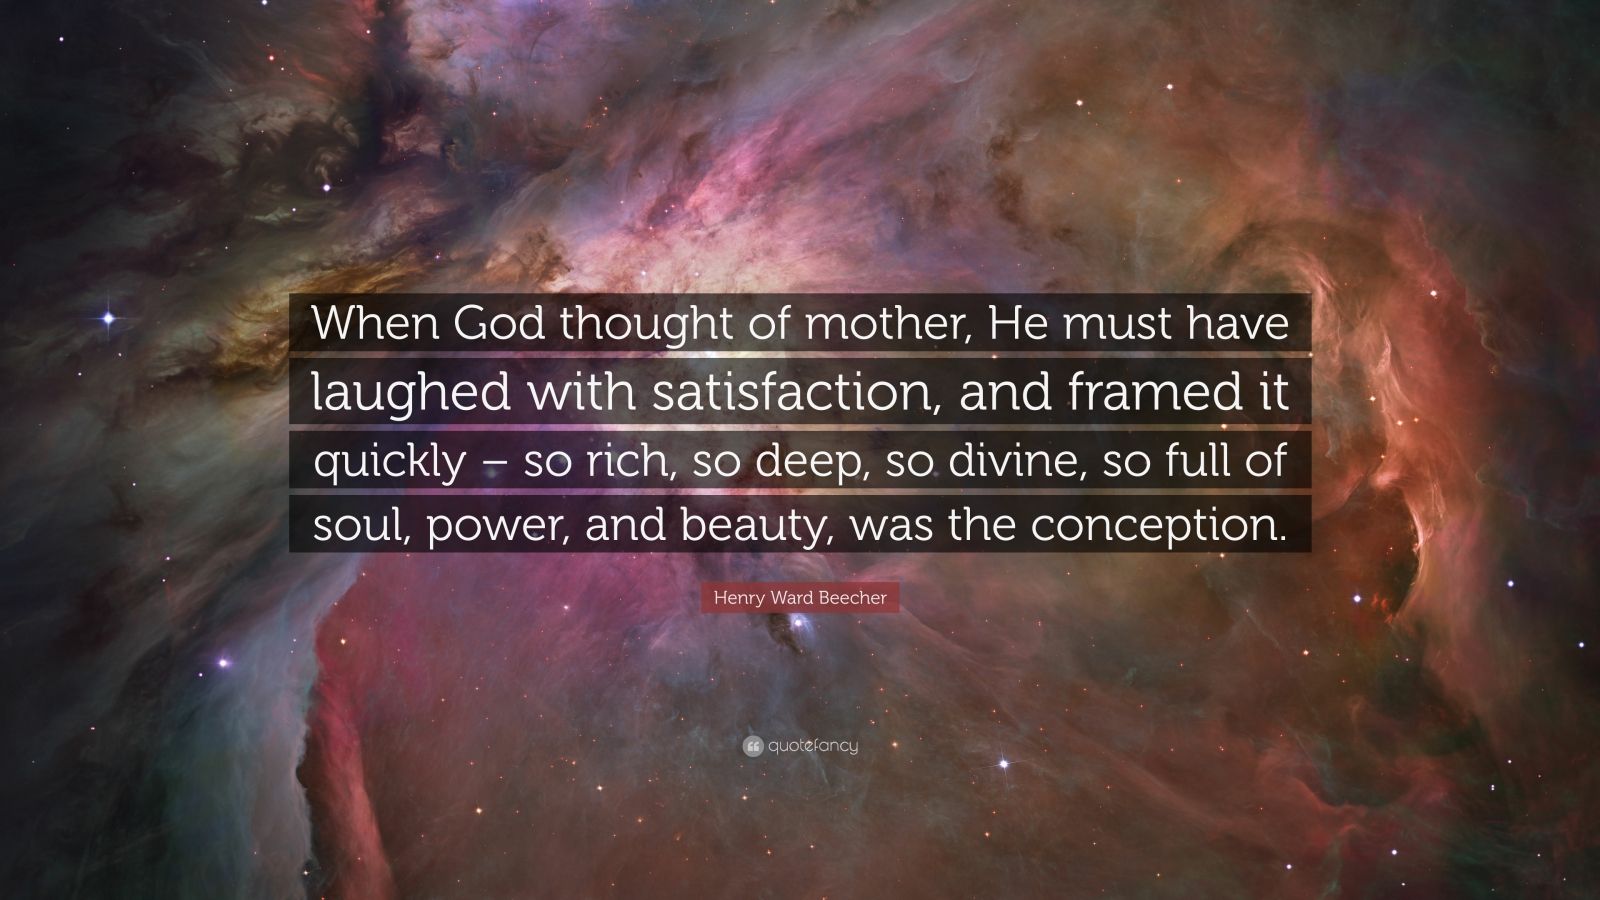 Henry Ward Beecher Quote: “When God thought of mother, He must ...